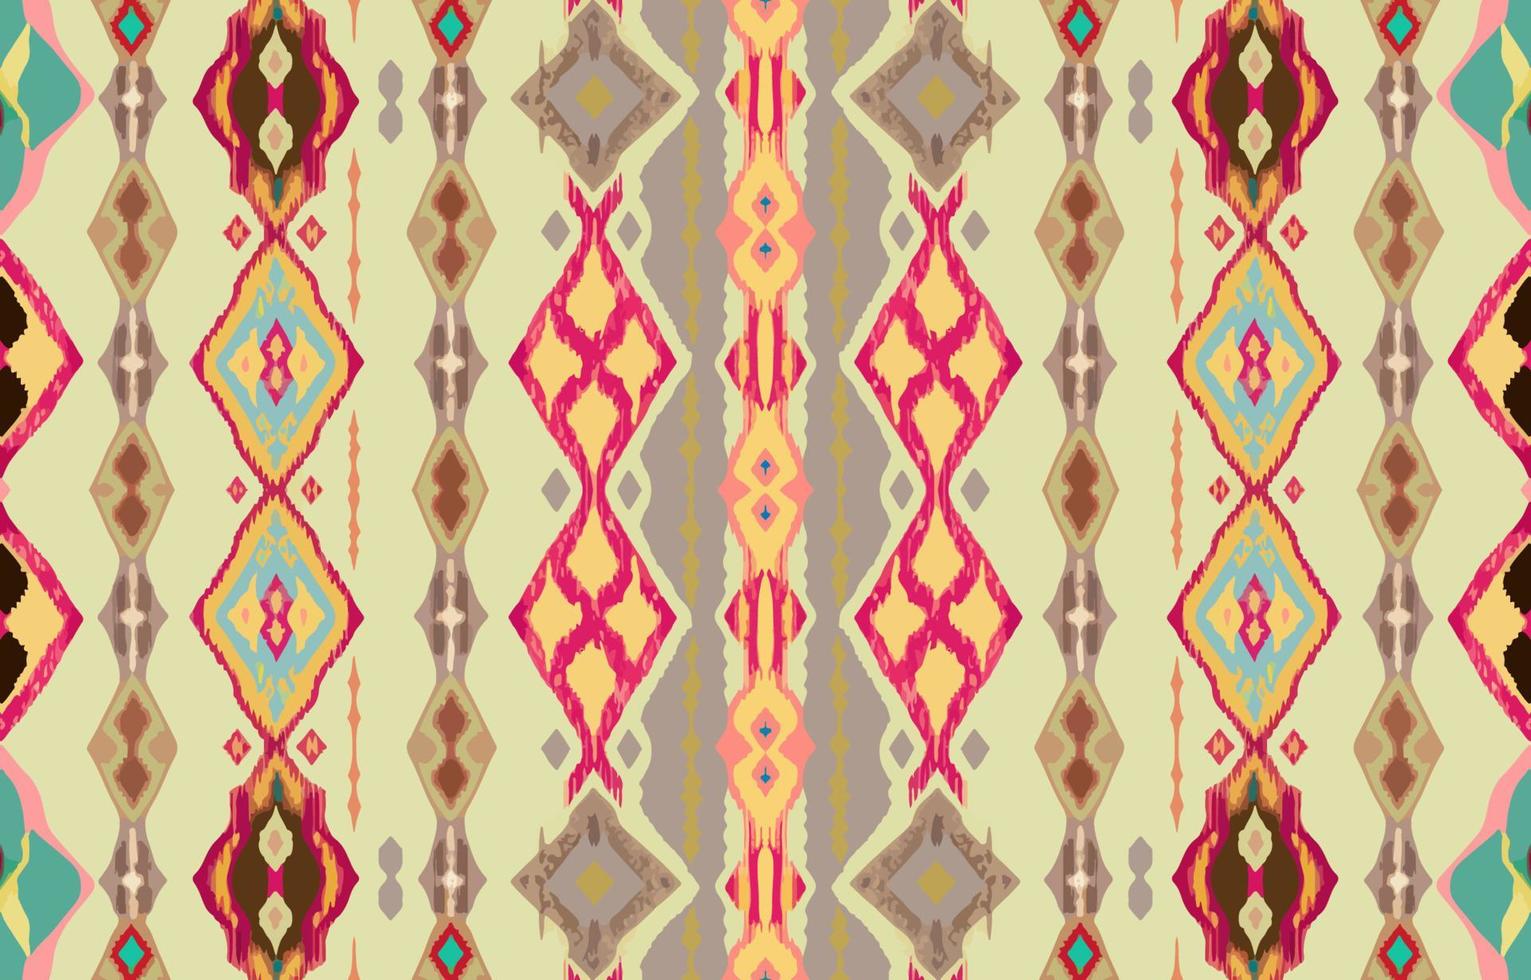 Ethnic seamless fabric pattern. Abstract traditional folk antique vintage retro blurred graphic line. Fabric textile vector illustration ornate elegant luxury style. Art print for clothing, background